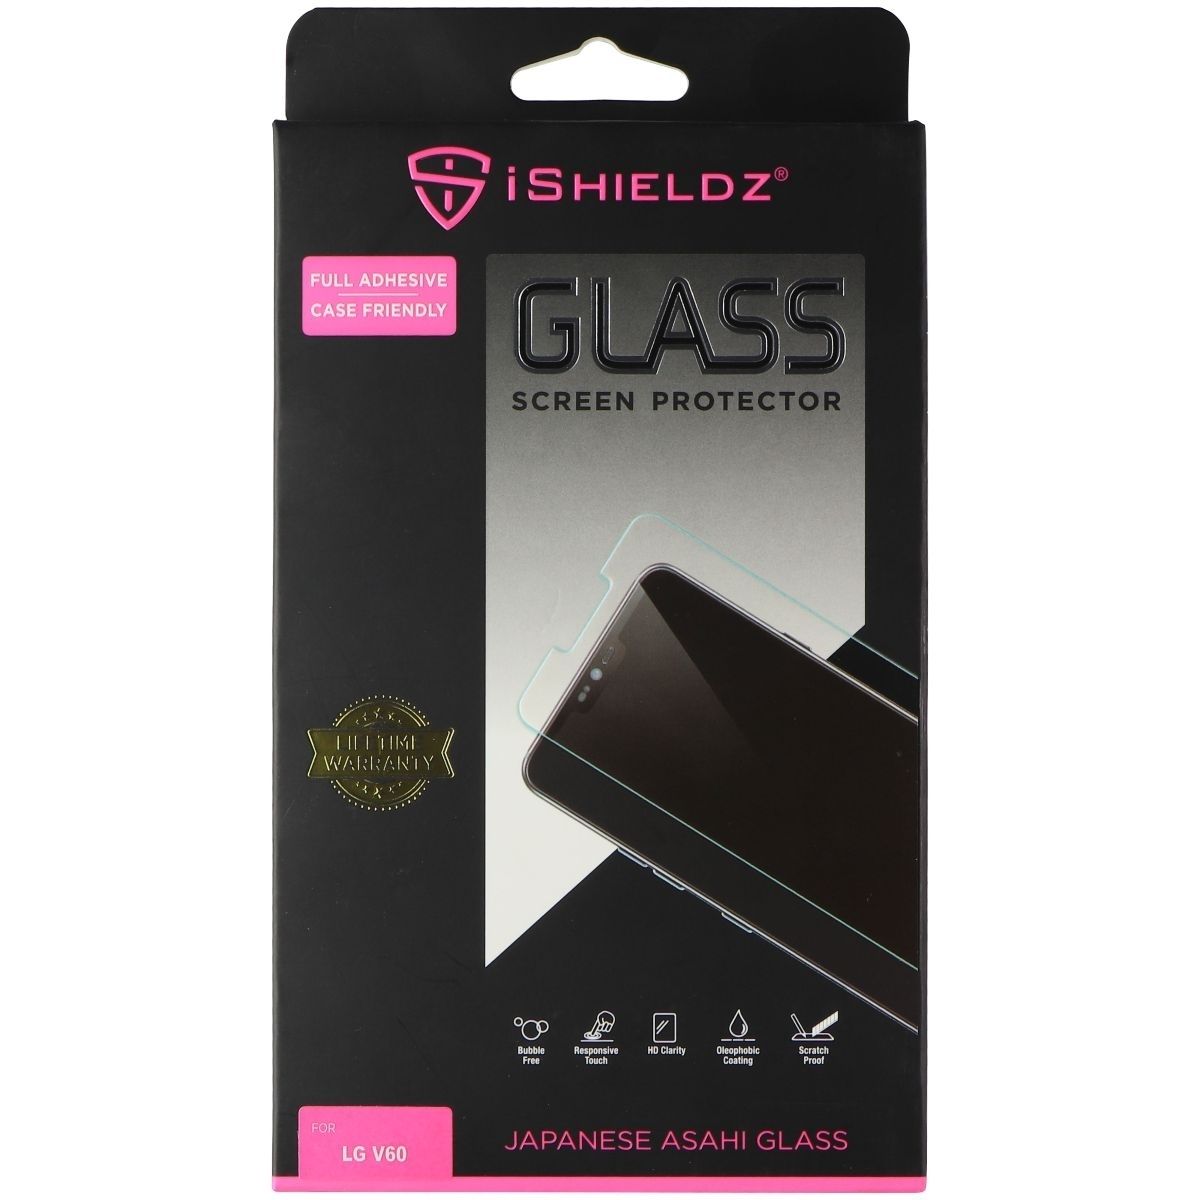 IShieldz Tempered Glass Screen Protector For LG V60 Smartphone - Clear (Refurbished)